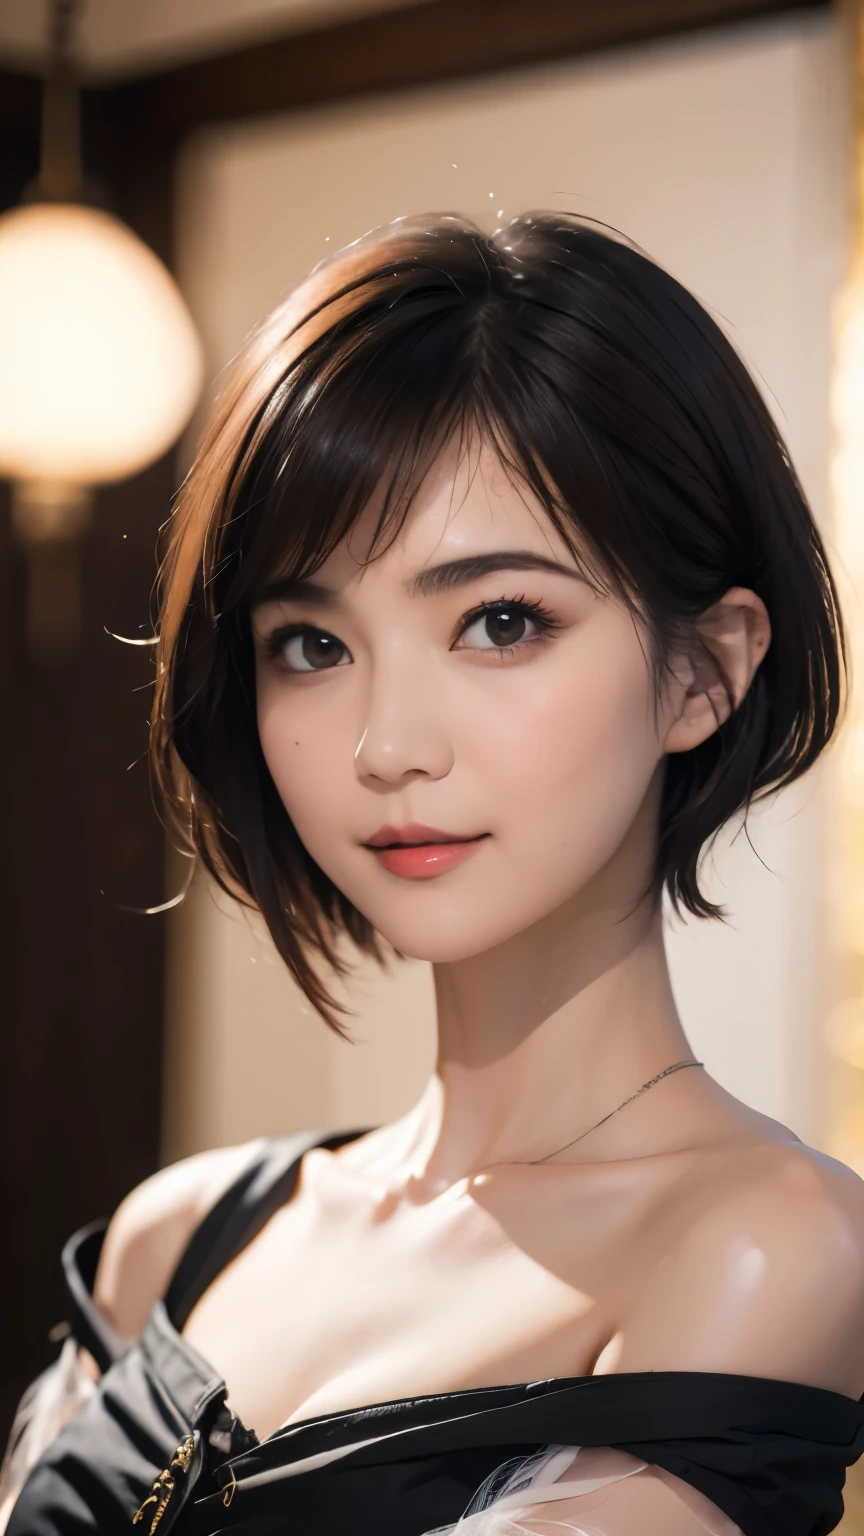 147
(20 year old woman,animal character print costume), (surreal), (High resolution), ((beautiful hairstyle 46)), ((short hair:1.46)), (gentle smile), (breasted:1.1), (lipstick)
